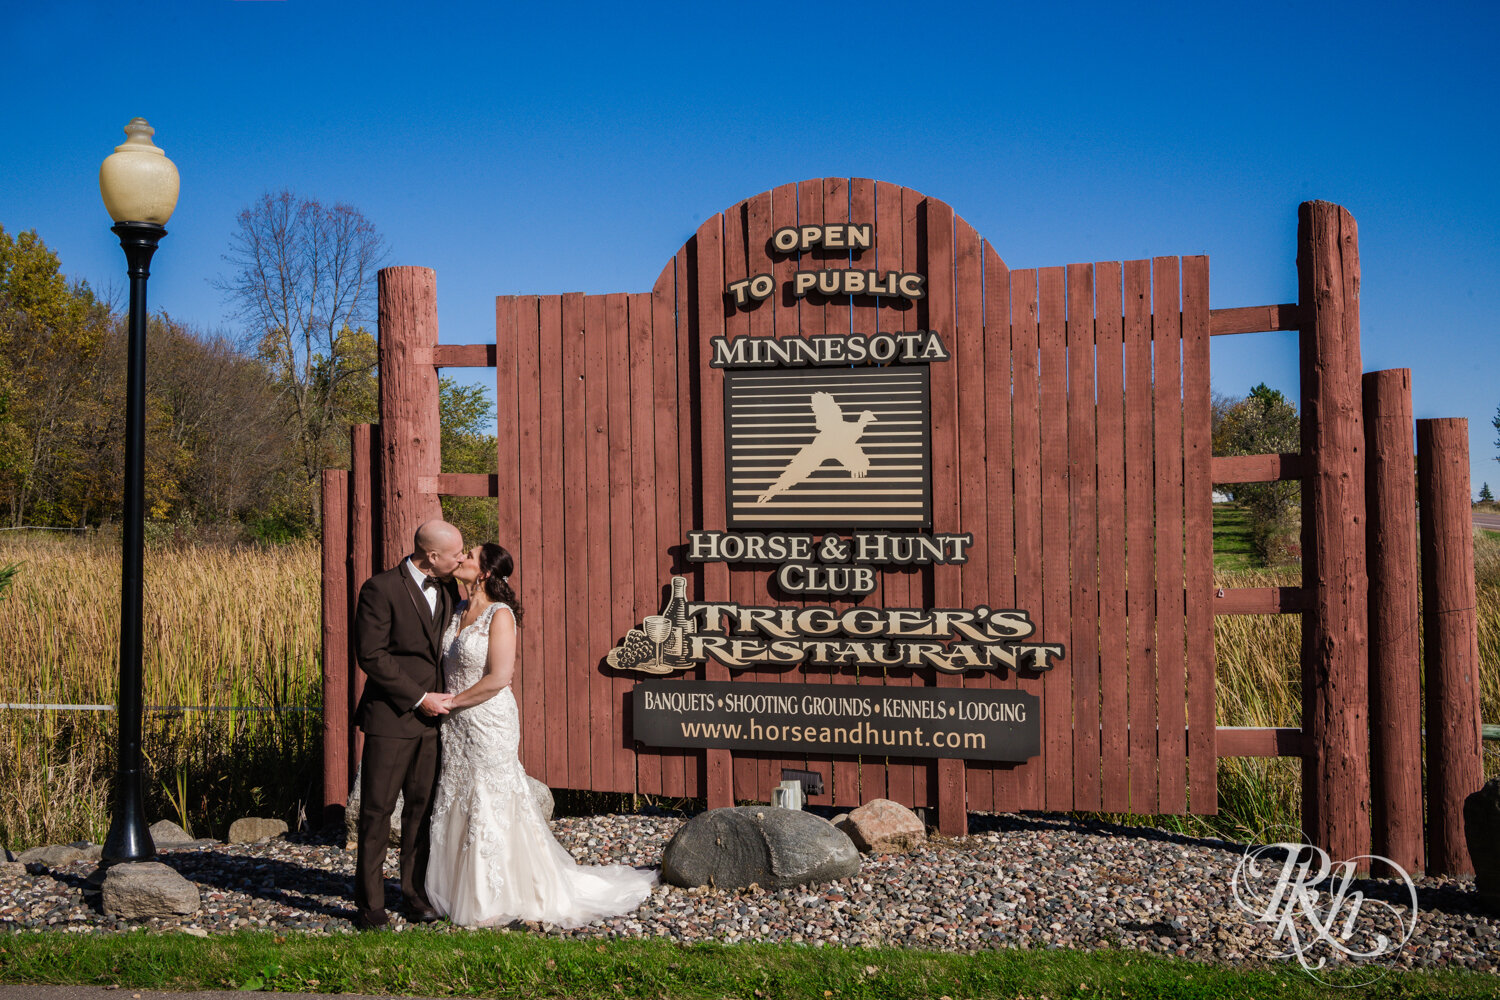 Bride and groom kiss in front of the sign at Minnesota Horse and Hunt Club in Prior Lake, Minnesota.